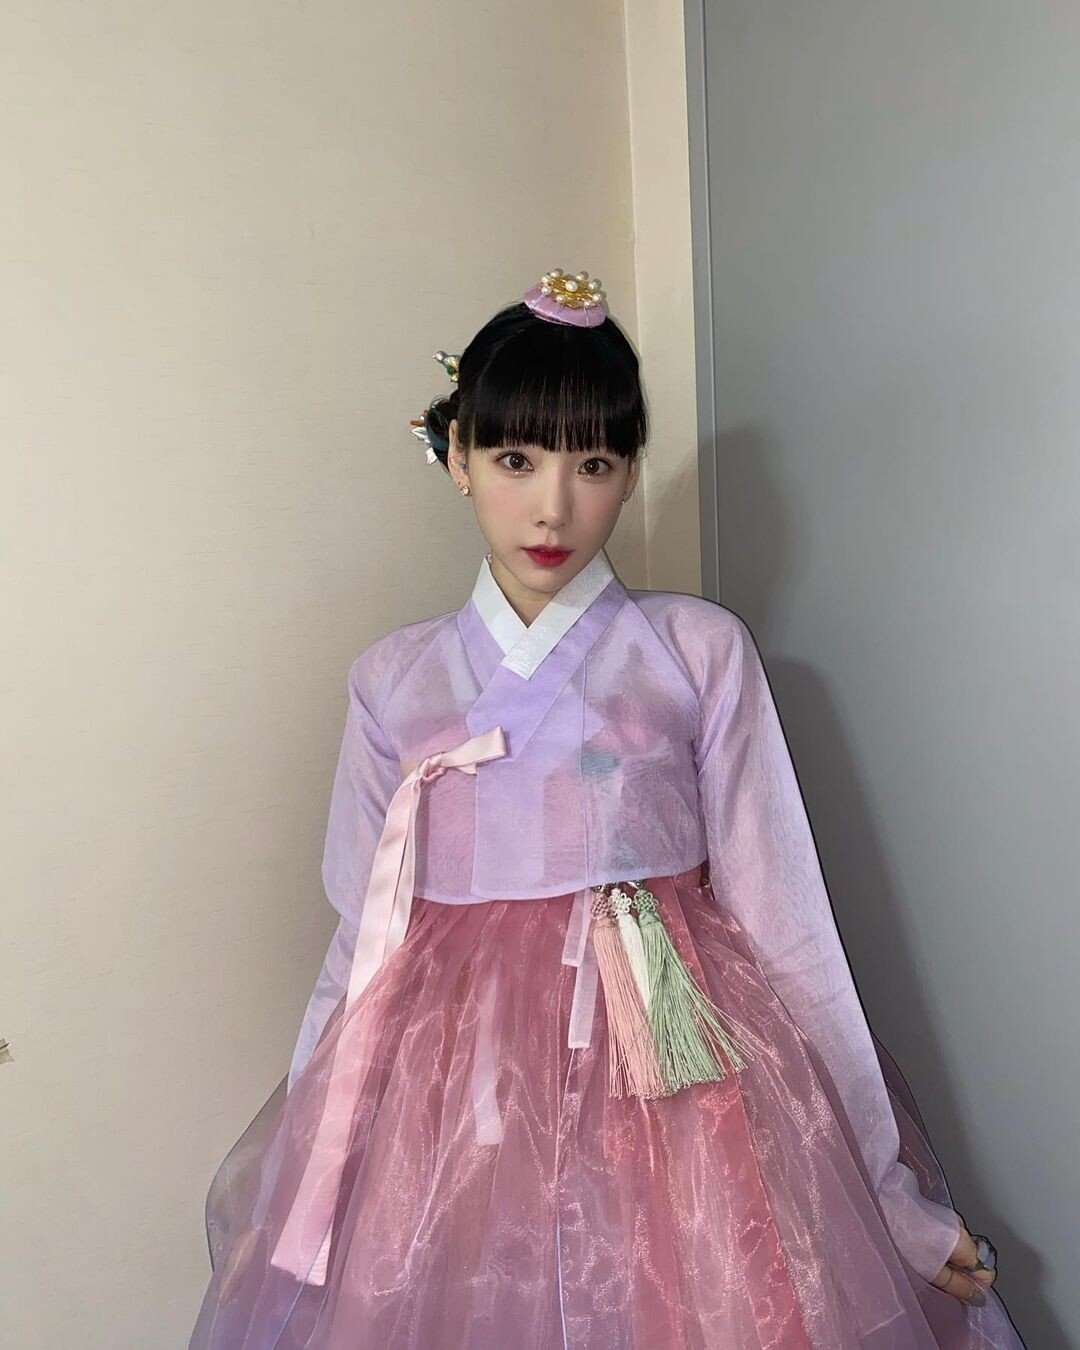 Taeyeon's Hanbok is all over the place.